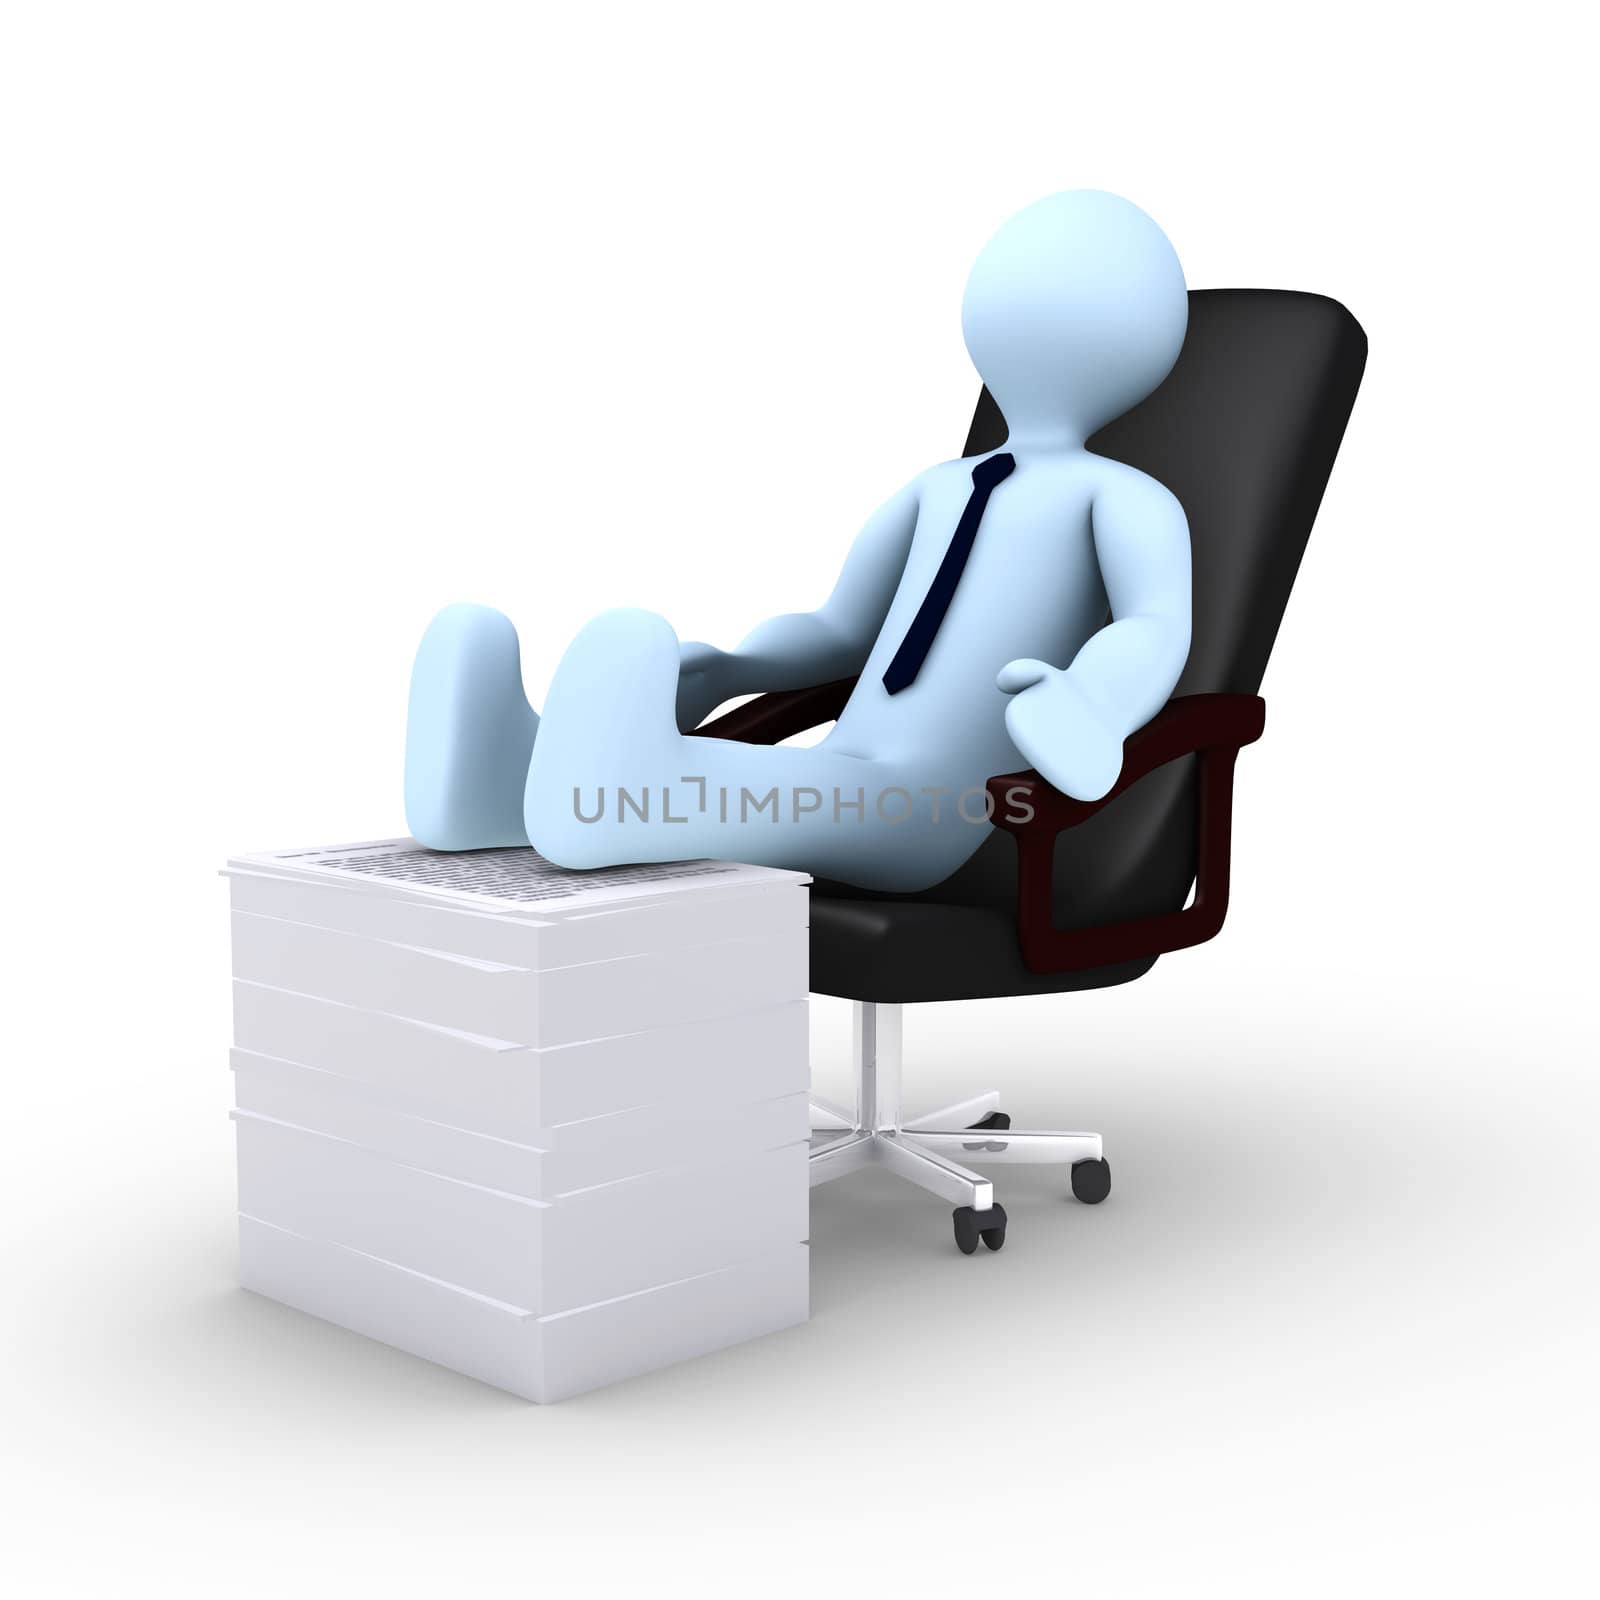 Tired 3d businessman is resting